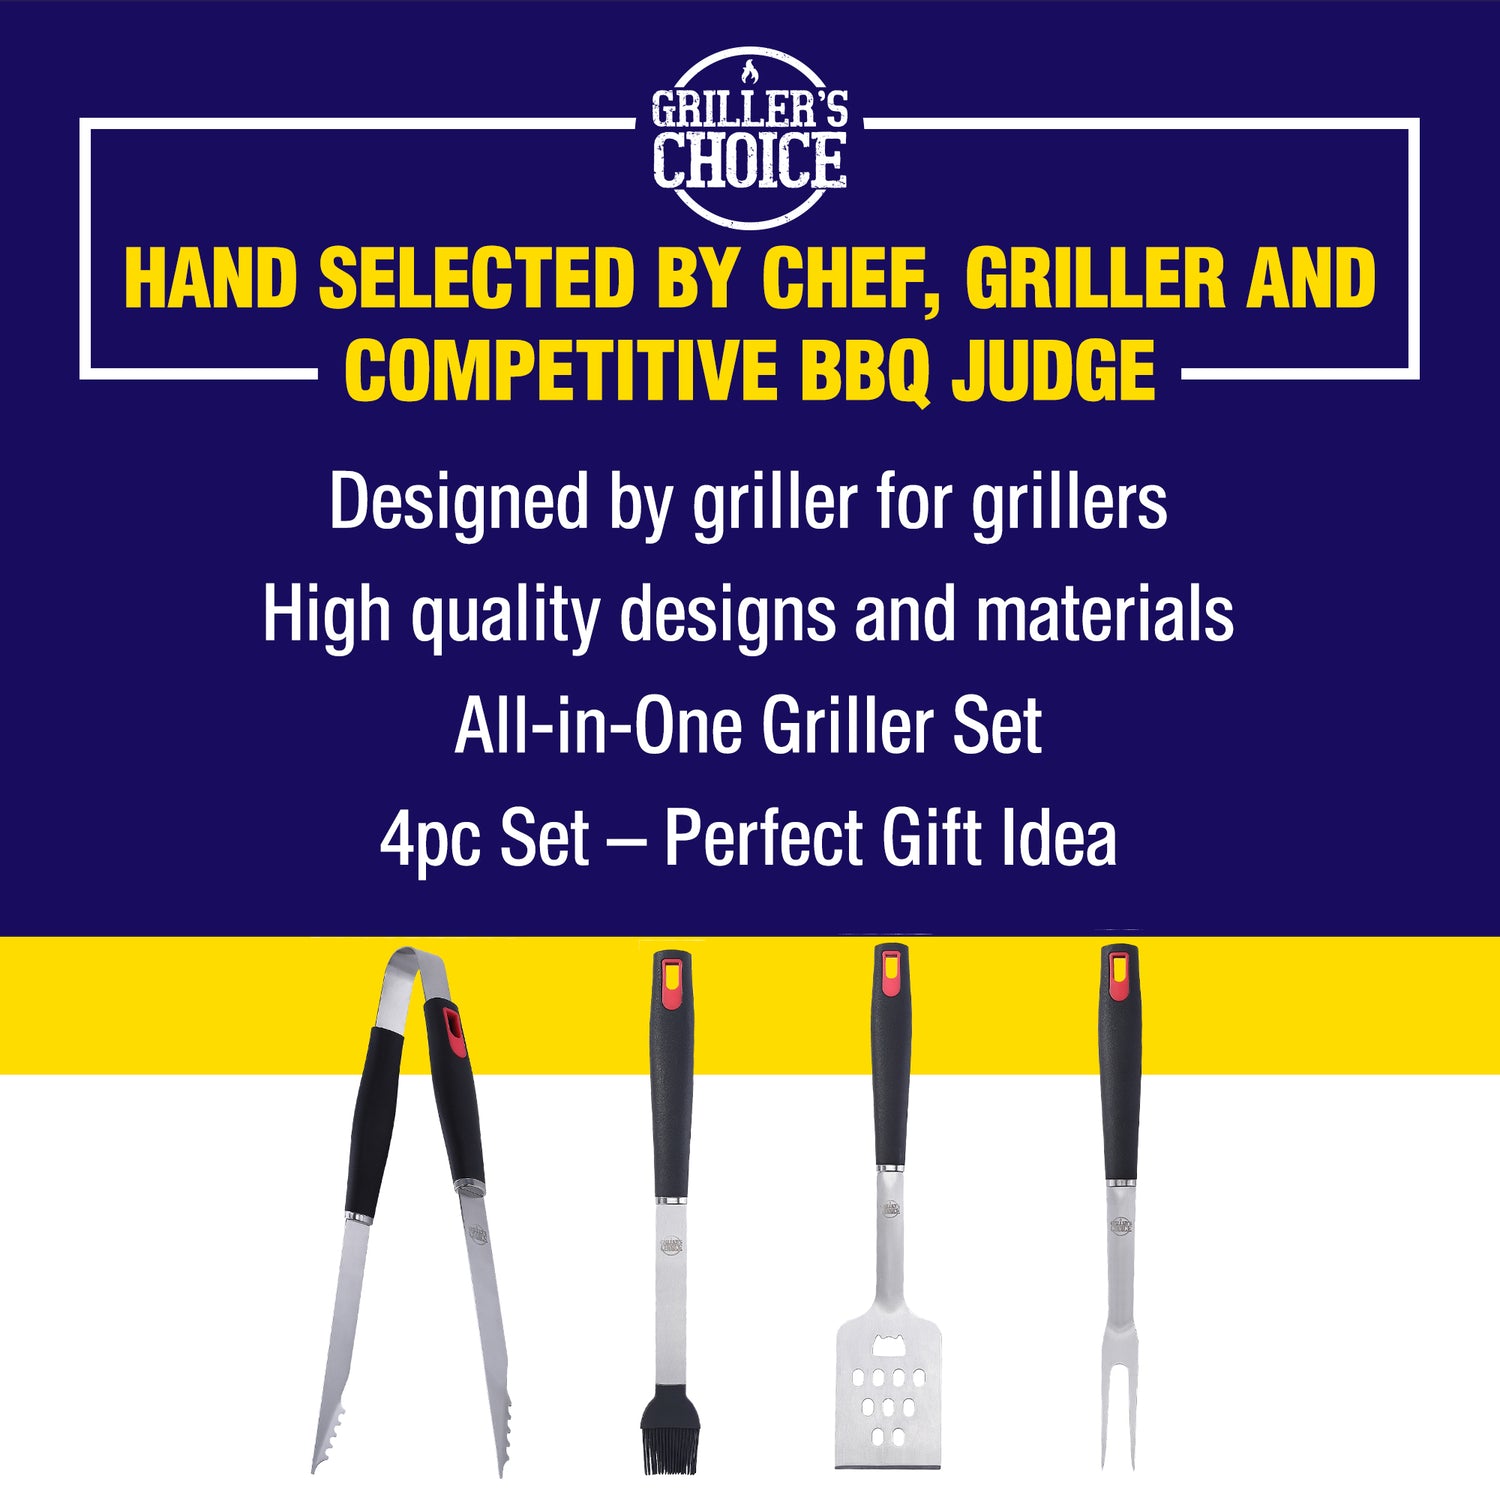 Griller's Choice Grilling Tools | Mathis Home